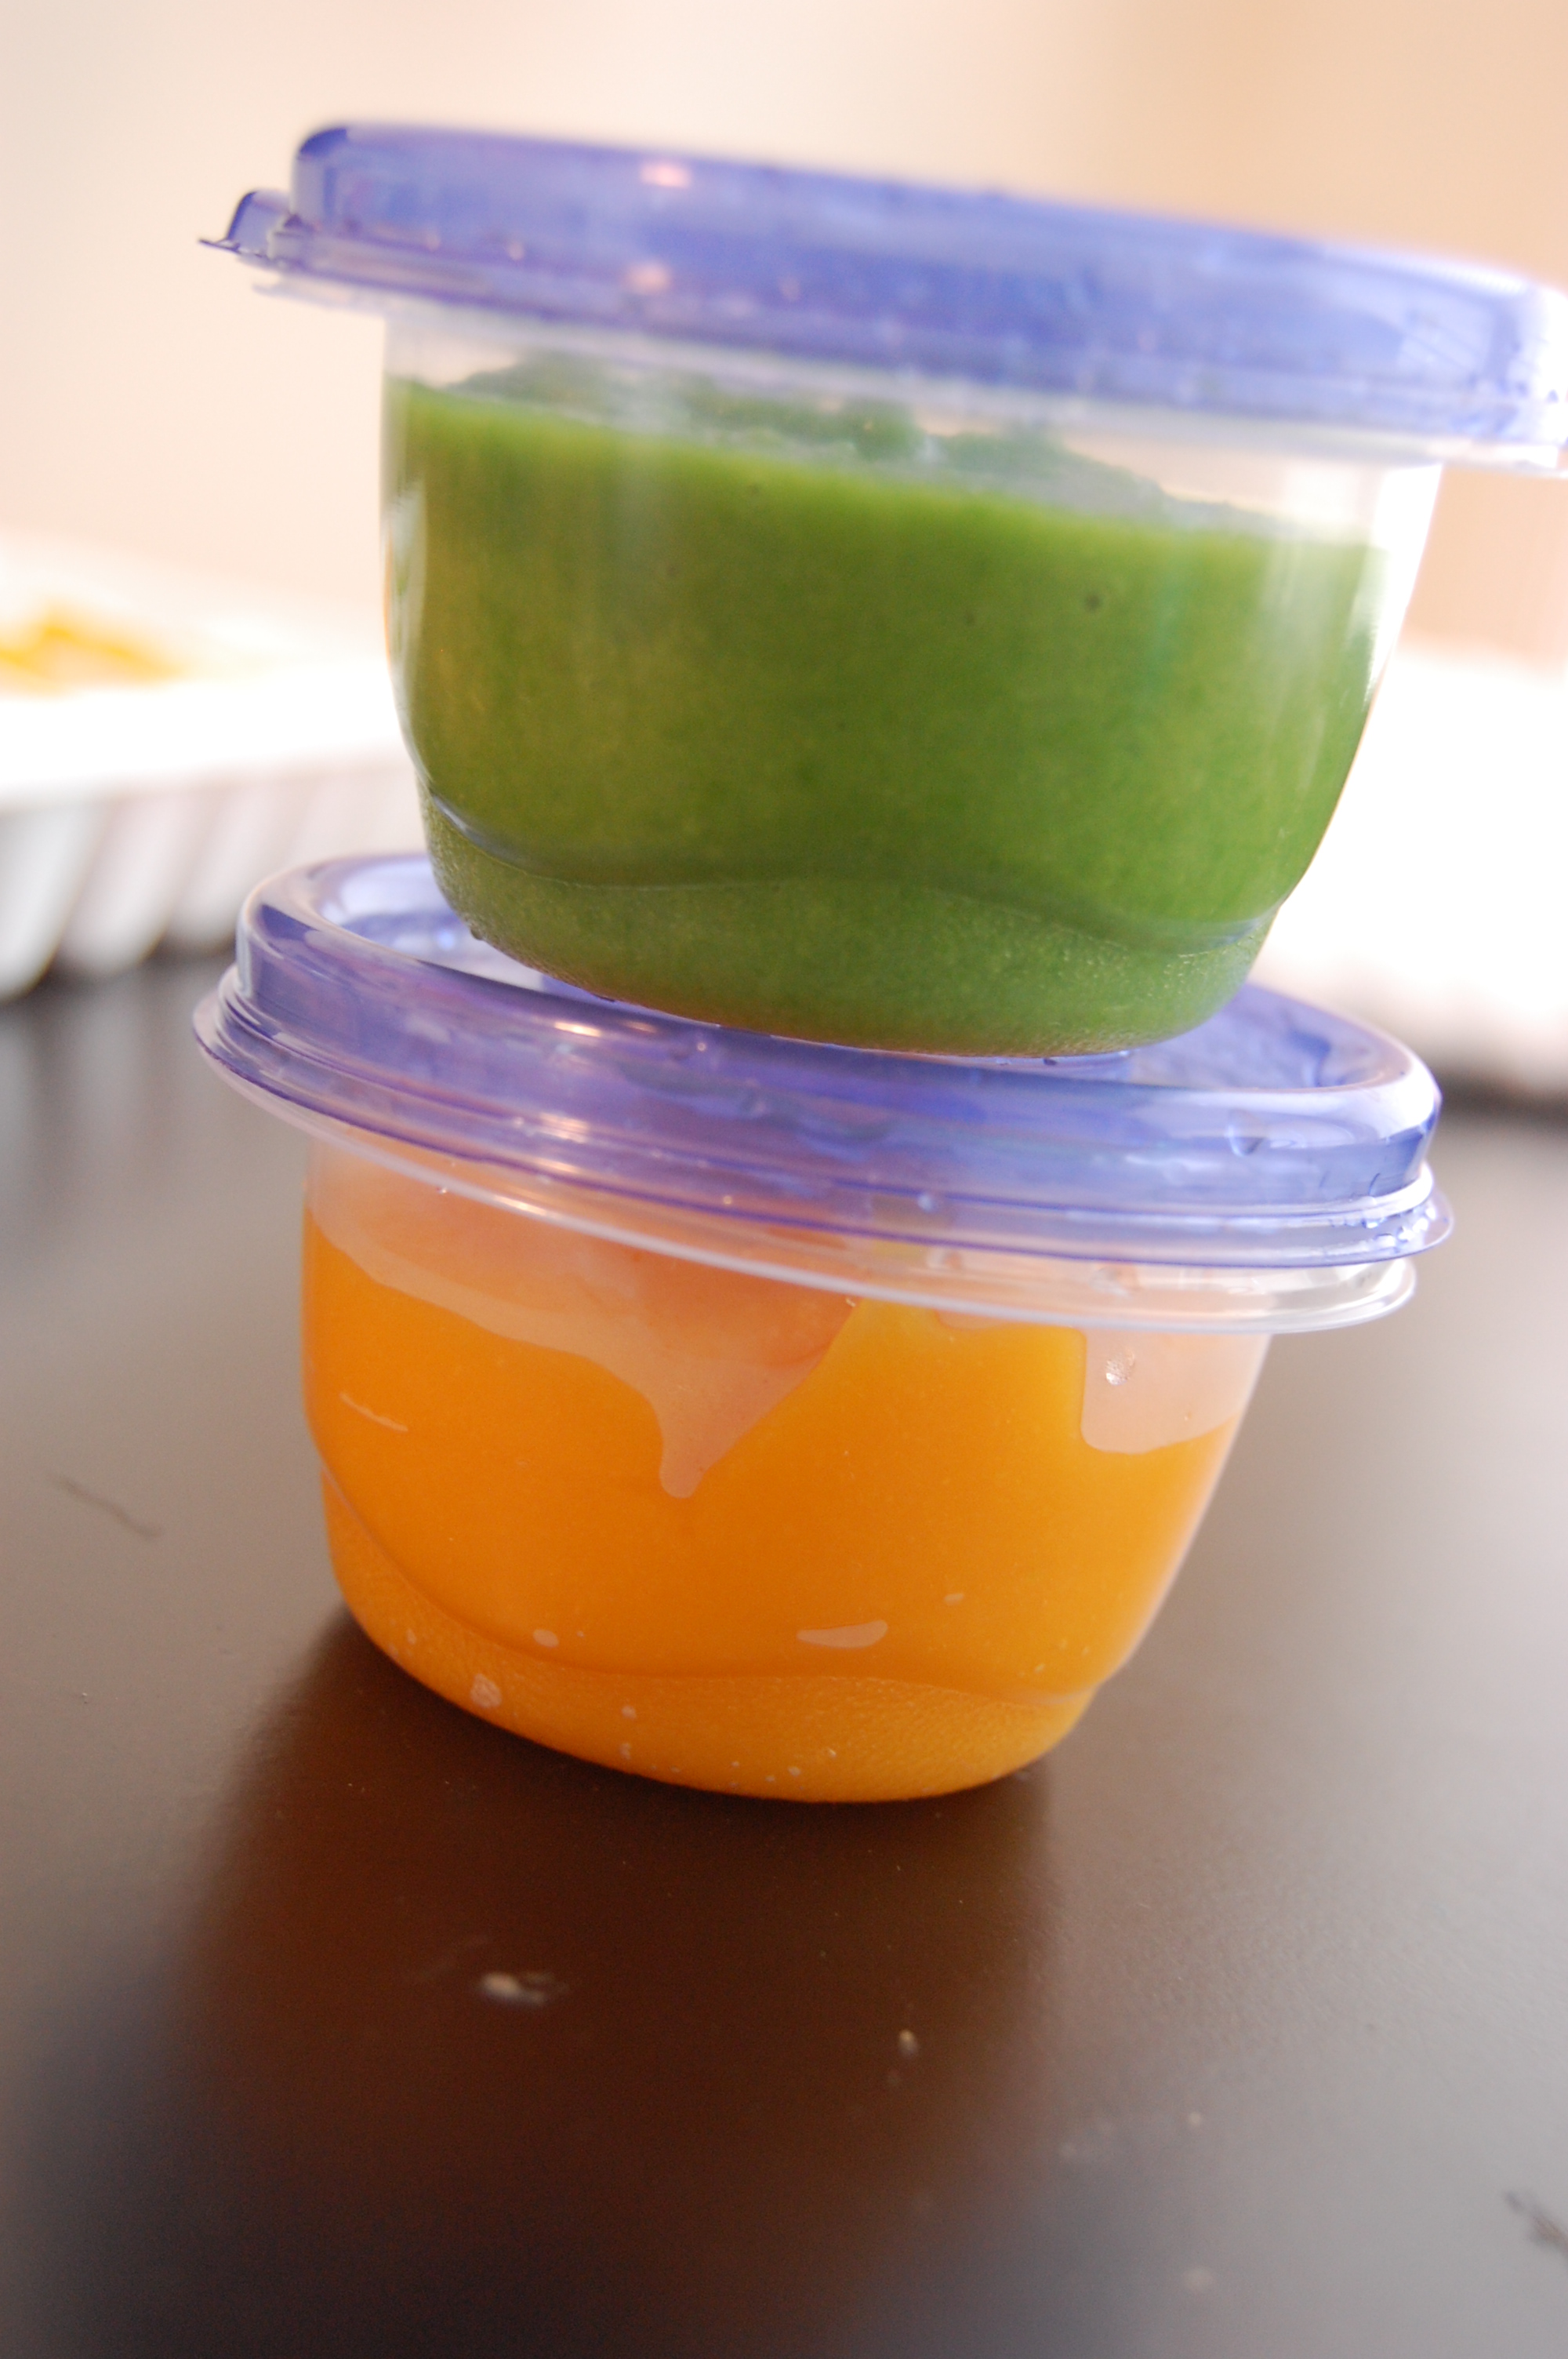 Download this Homemade Baby Food picture